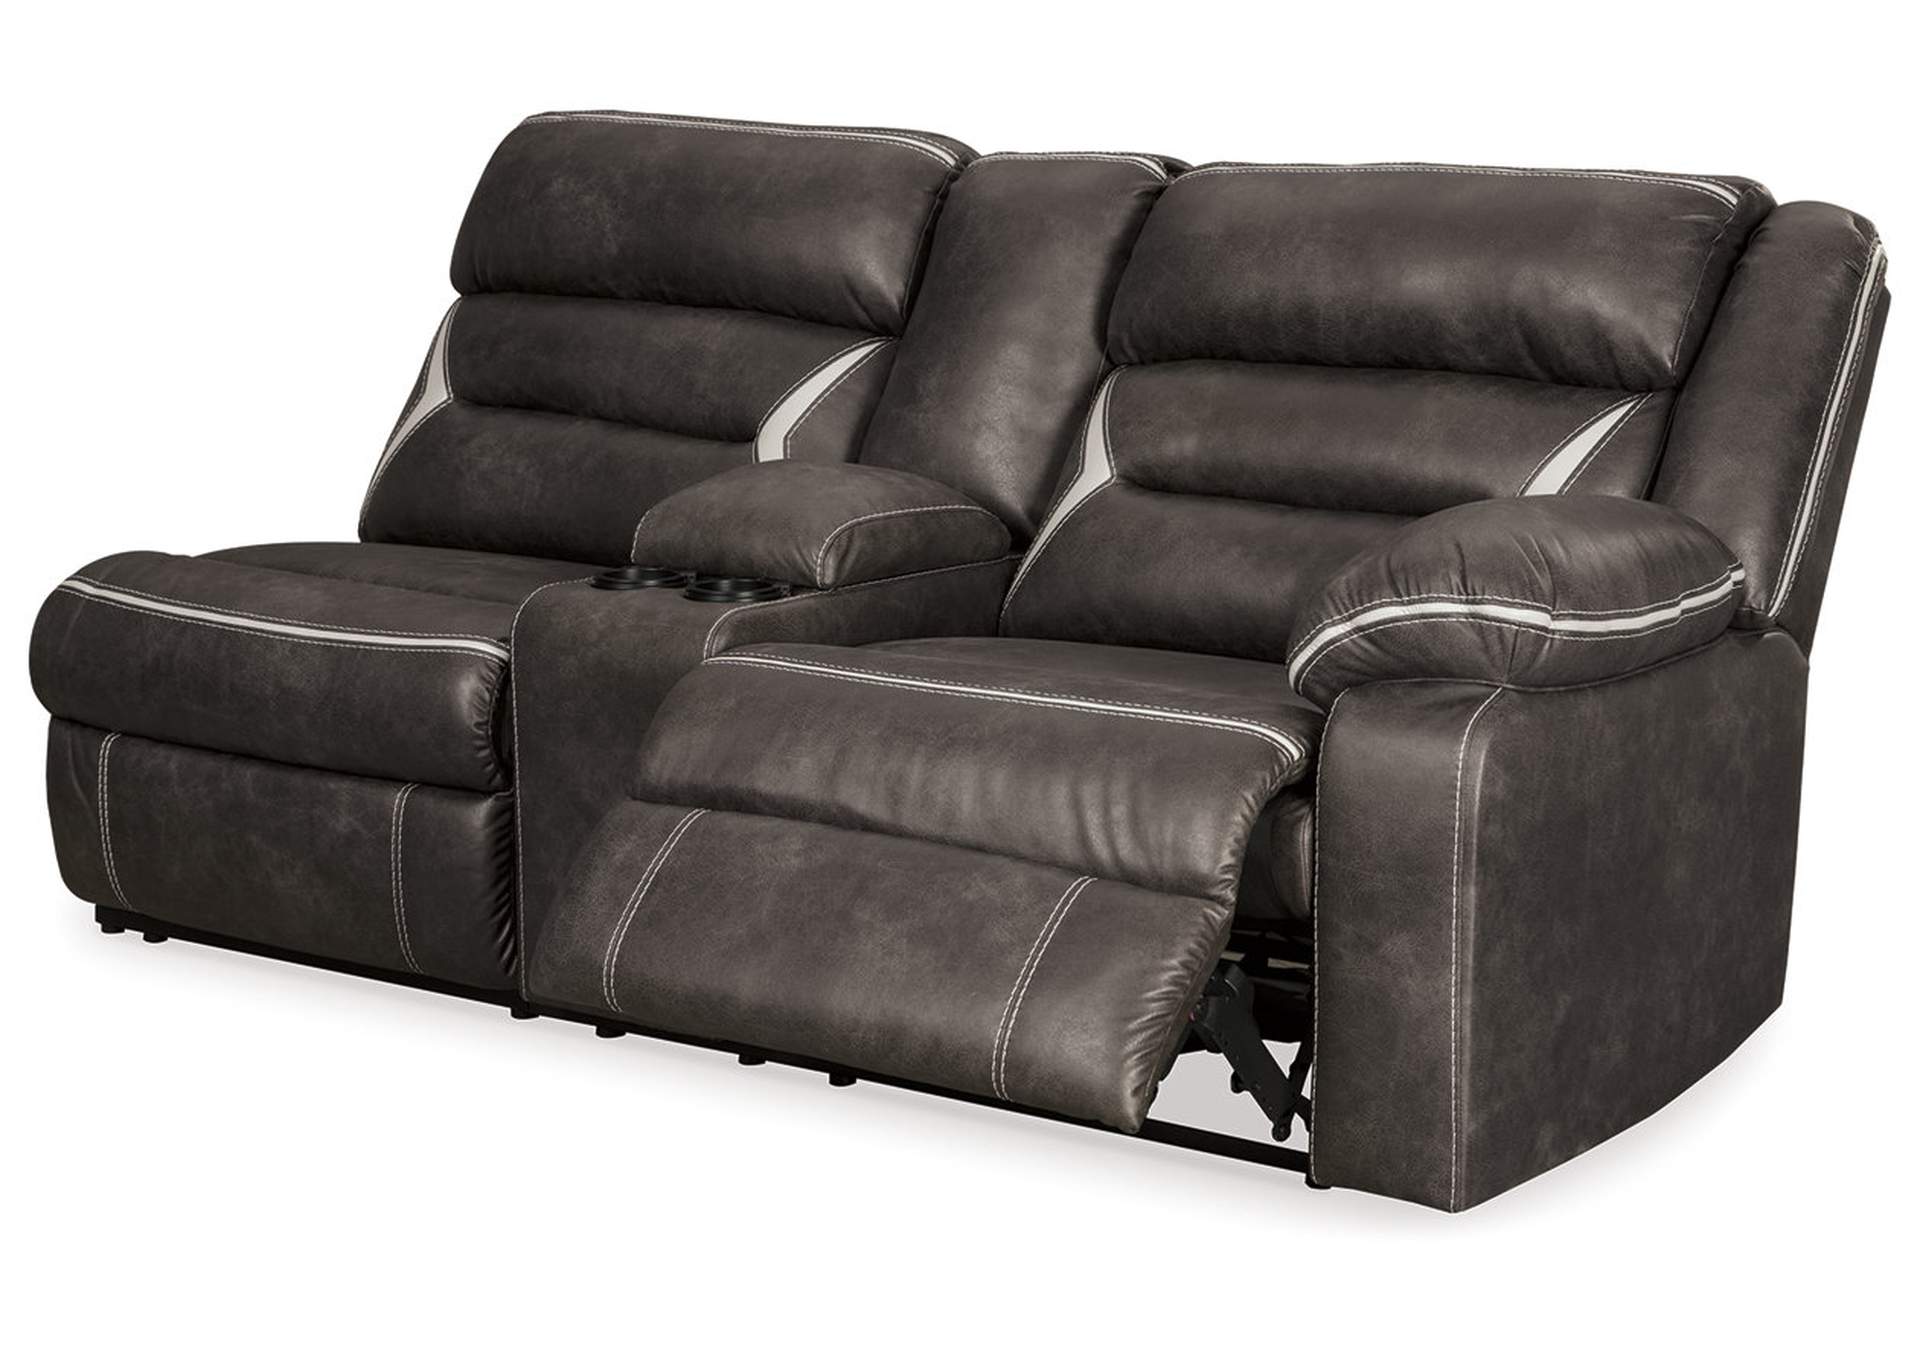 Kincord Right-Arm Facing Power Reclining Sofa with Console,Signature Design By Ashley